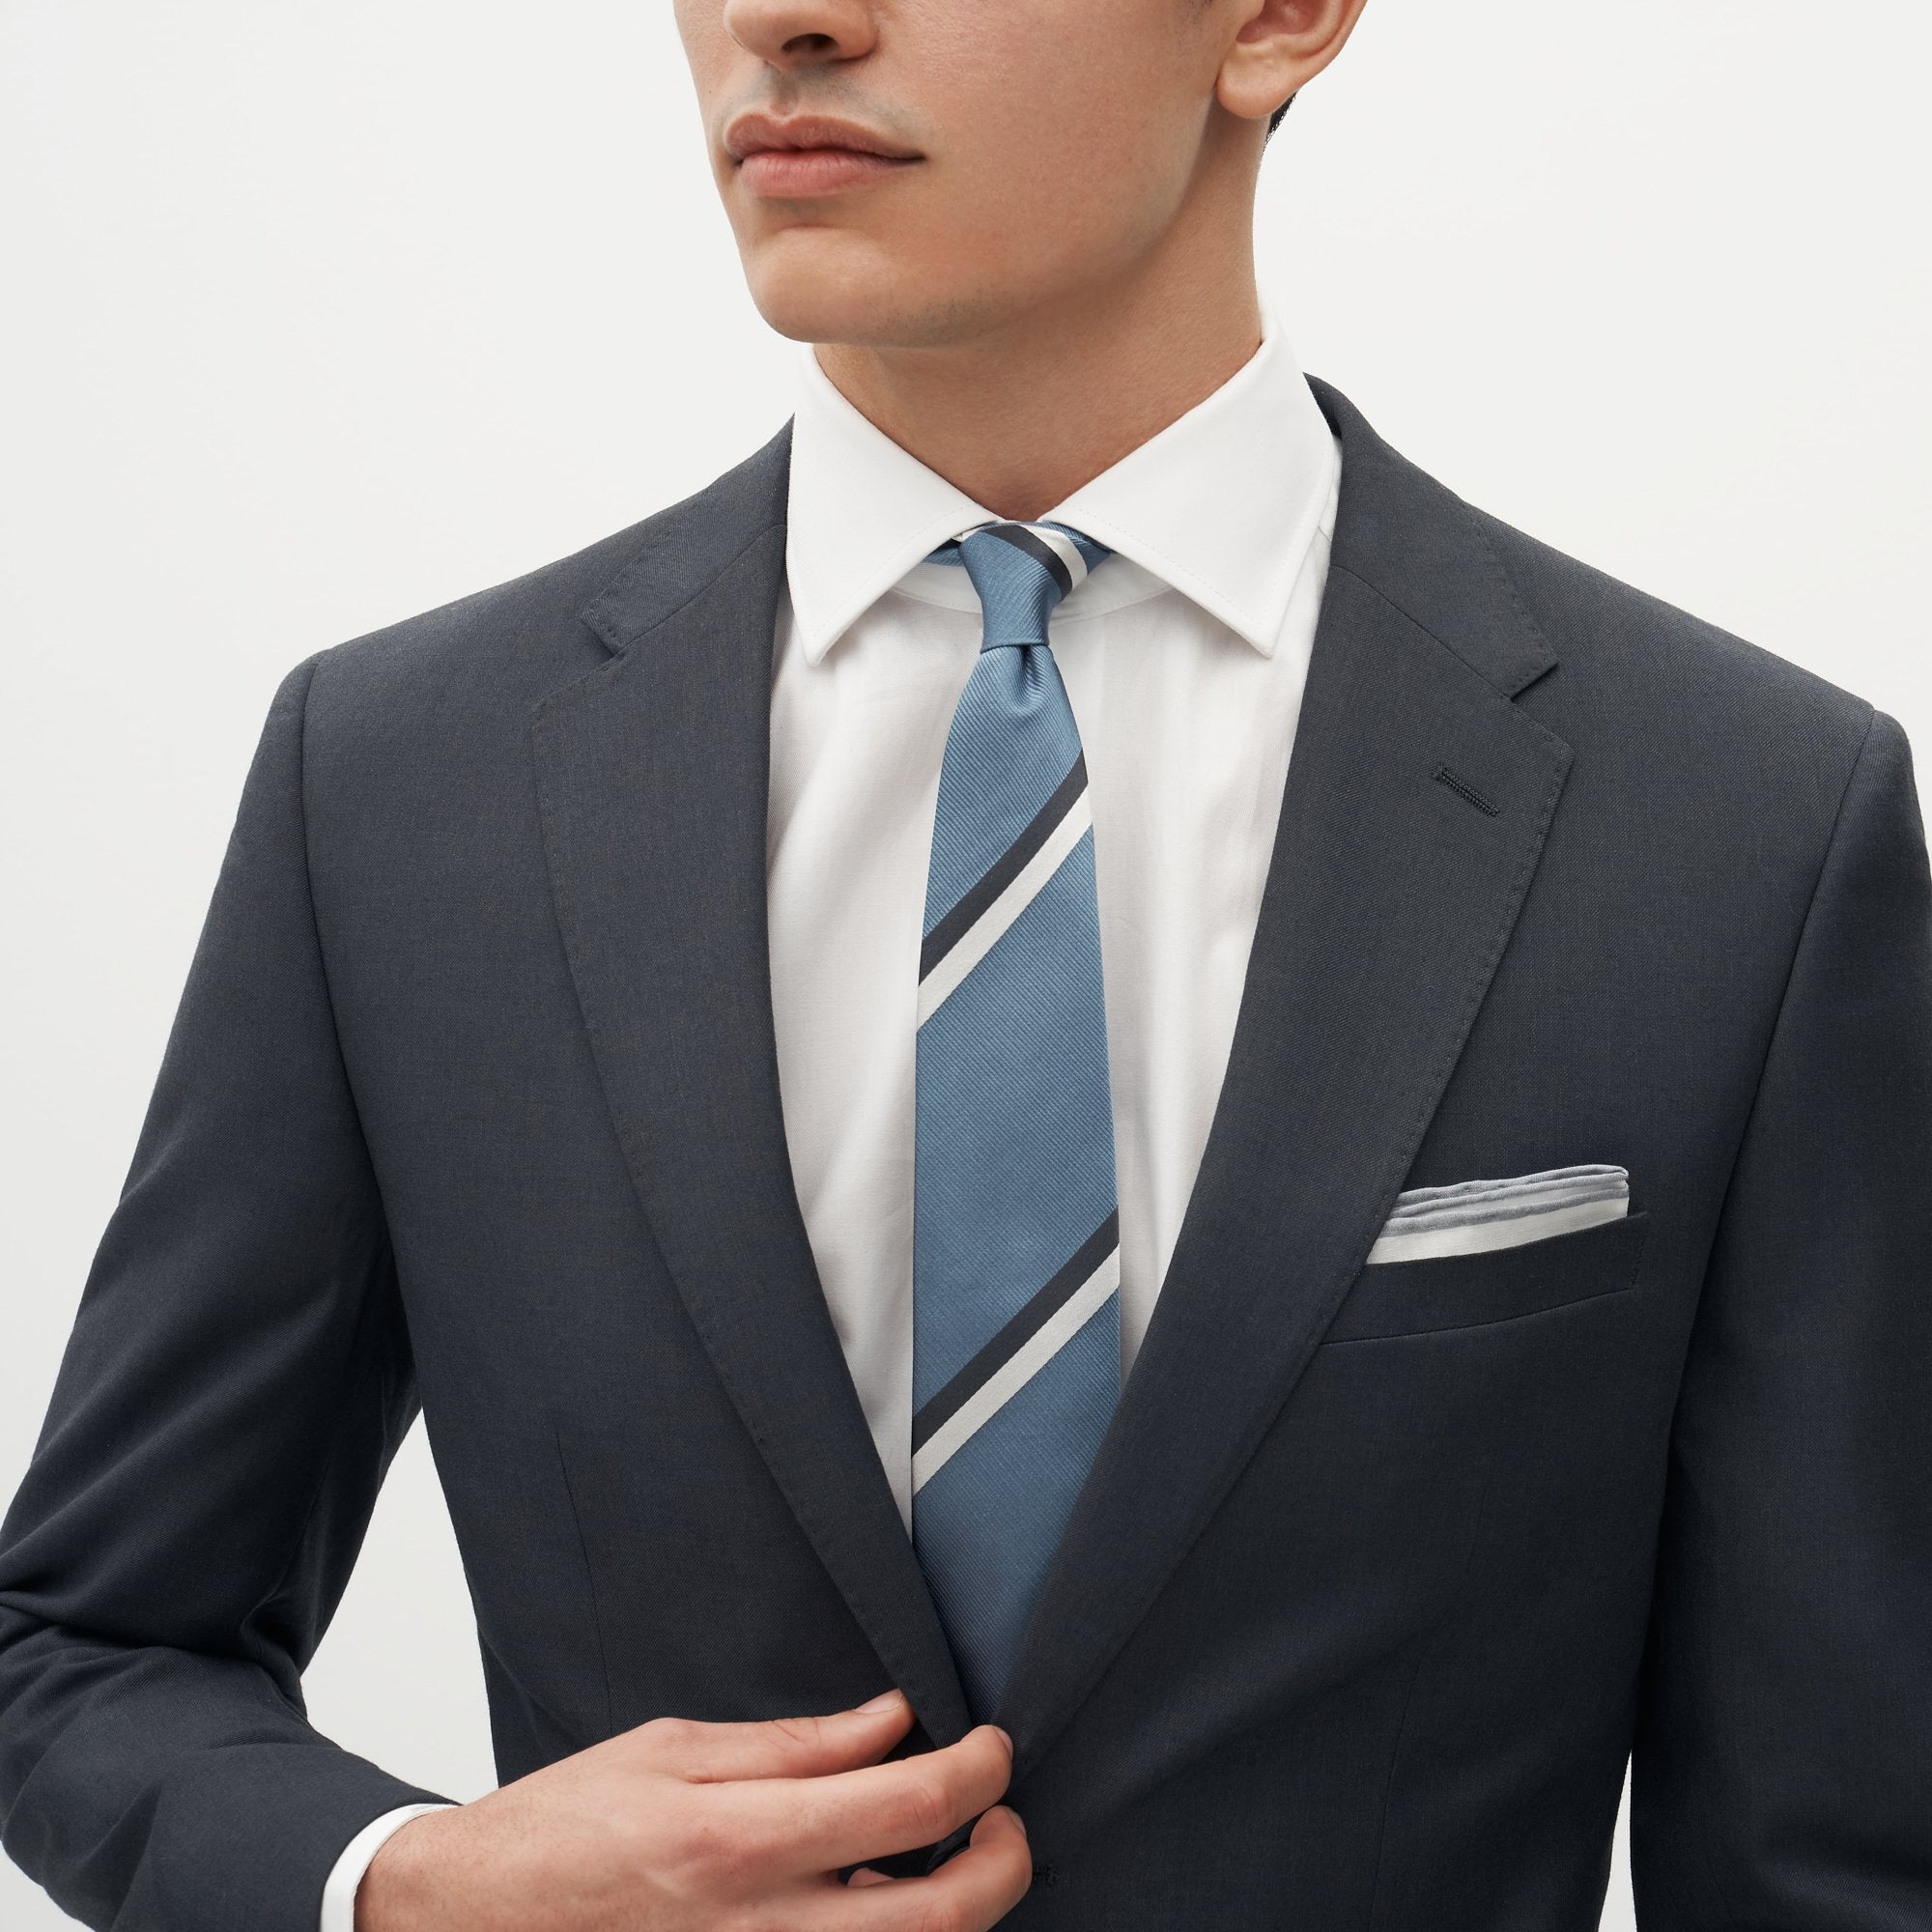 CHARCOAL_GRAY_SUIT__098_977e3ae5-11eb-4acb-9cfd-714077ce5051_2000x2000_crop_center.jpg.webp